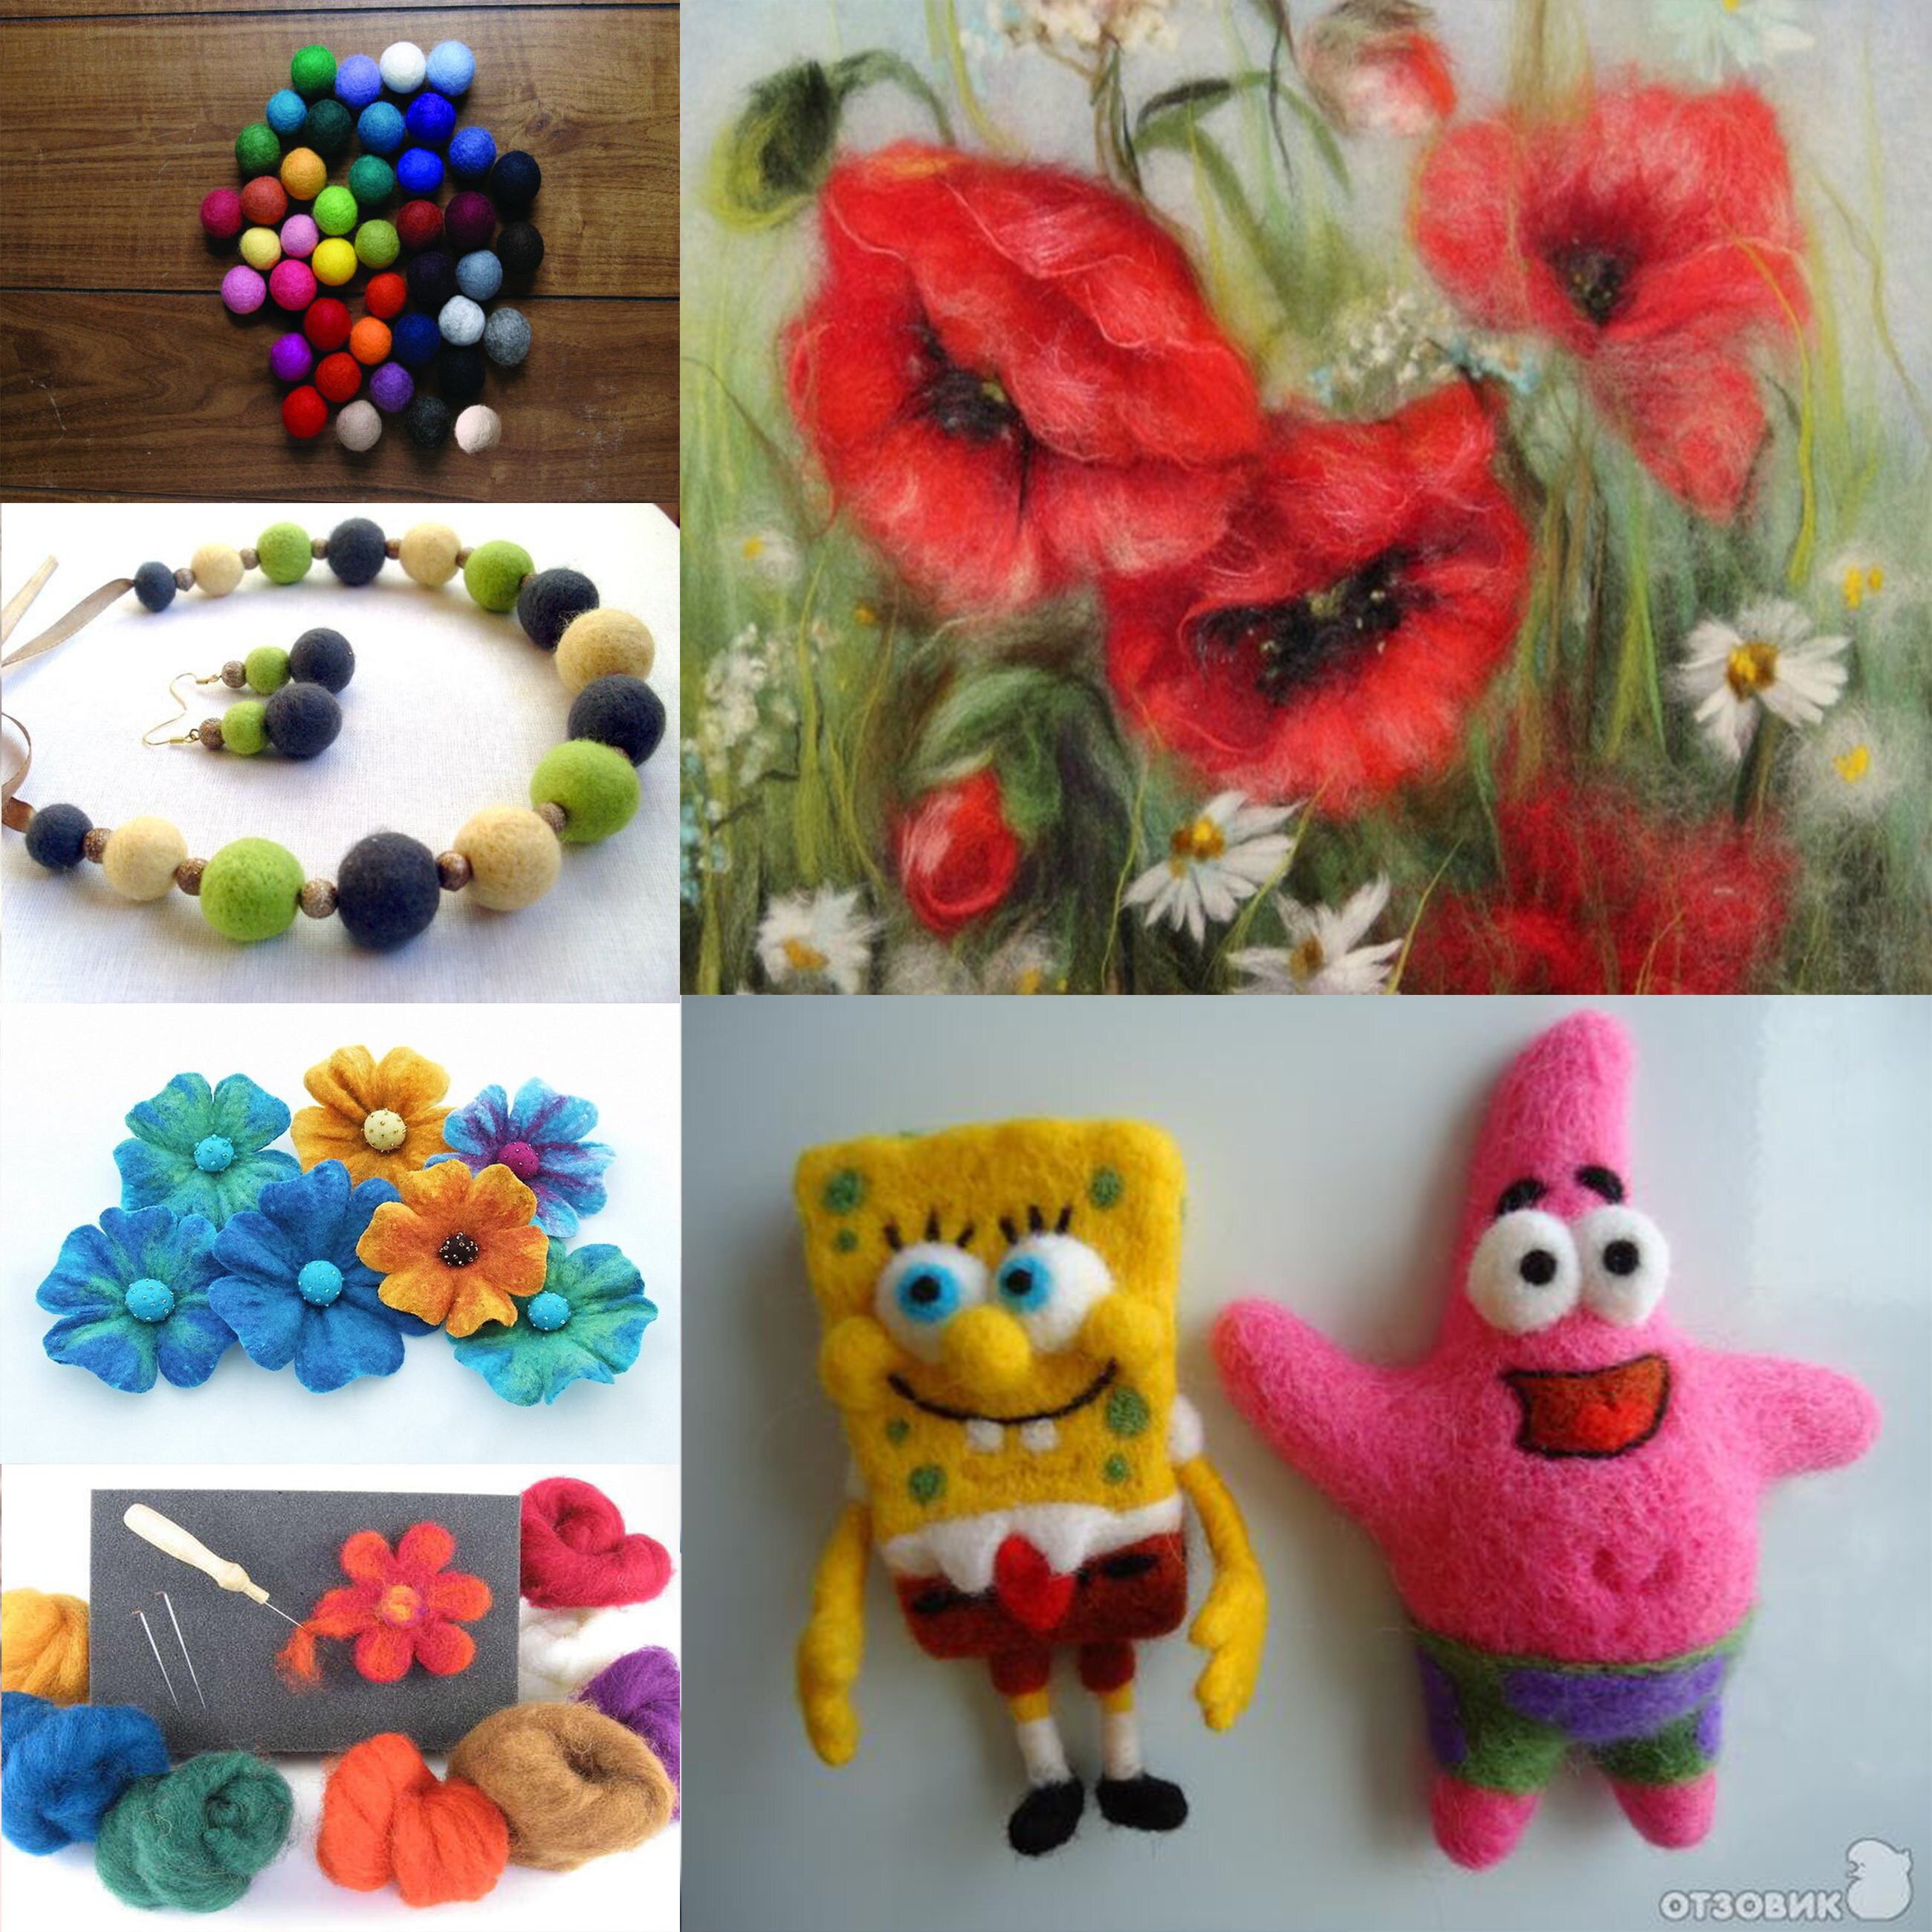  45 Colors Needle Felting Kits for Beginners, Needle Felting  Supplies Kits with Tools, Felt Starter Kits with Felting Needles, Storage  Bag Needle Felting Kits for DIY Handcrafts Christmas Decoration : Arts